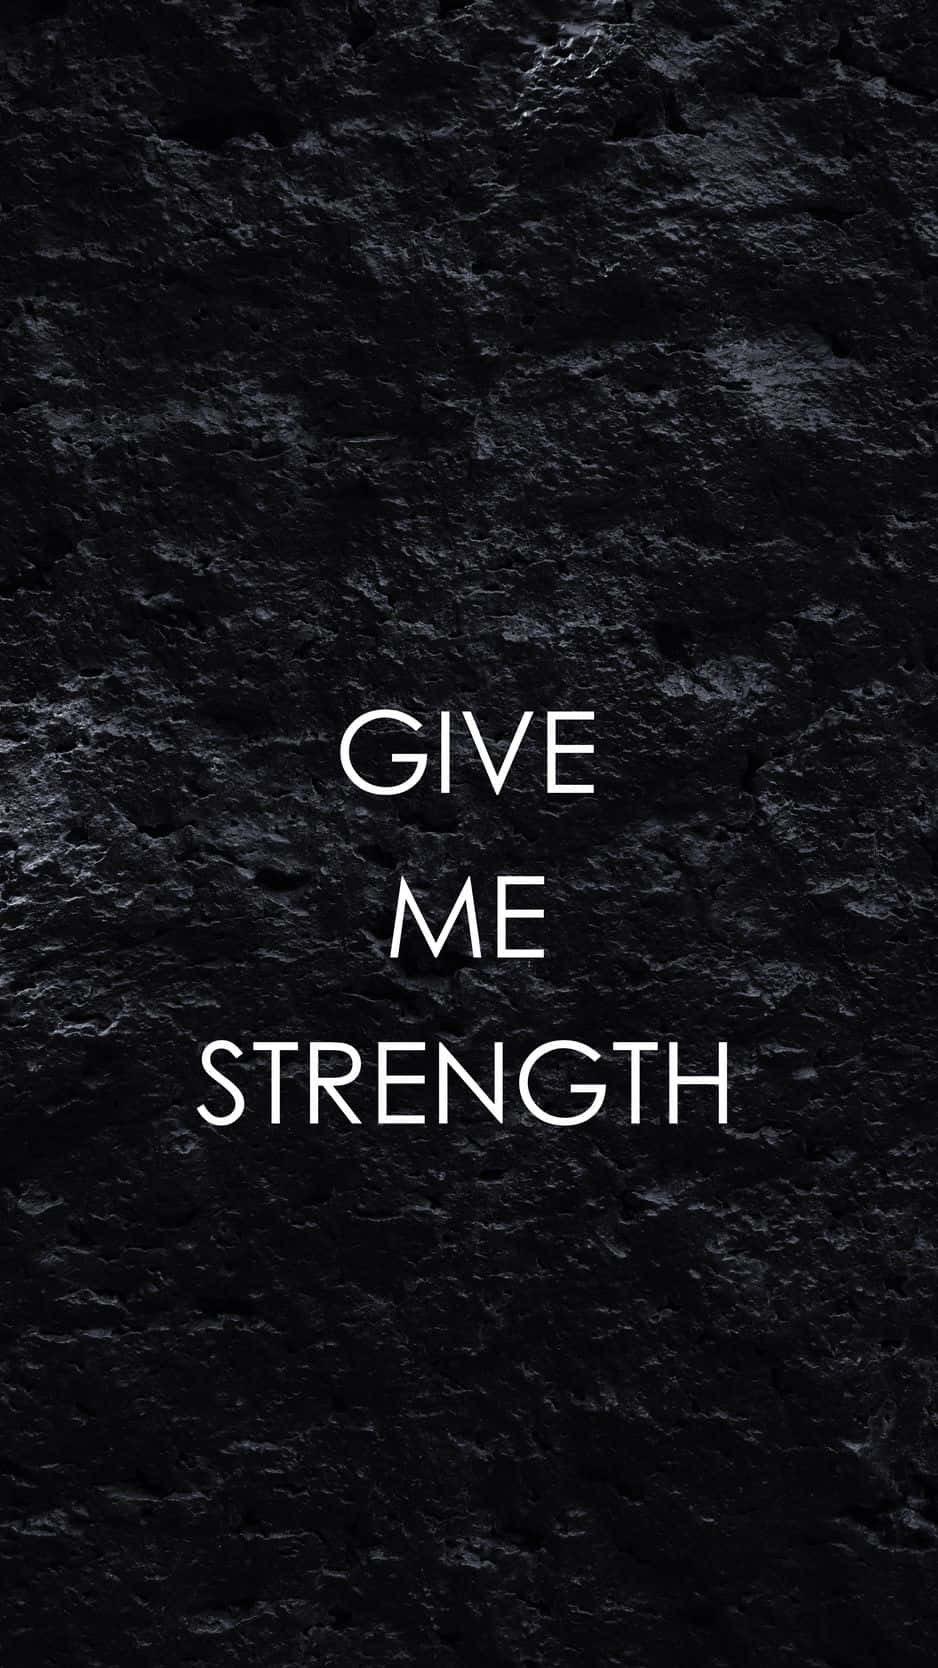 Give Me Strength - A Black And White Poster Wallpaper